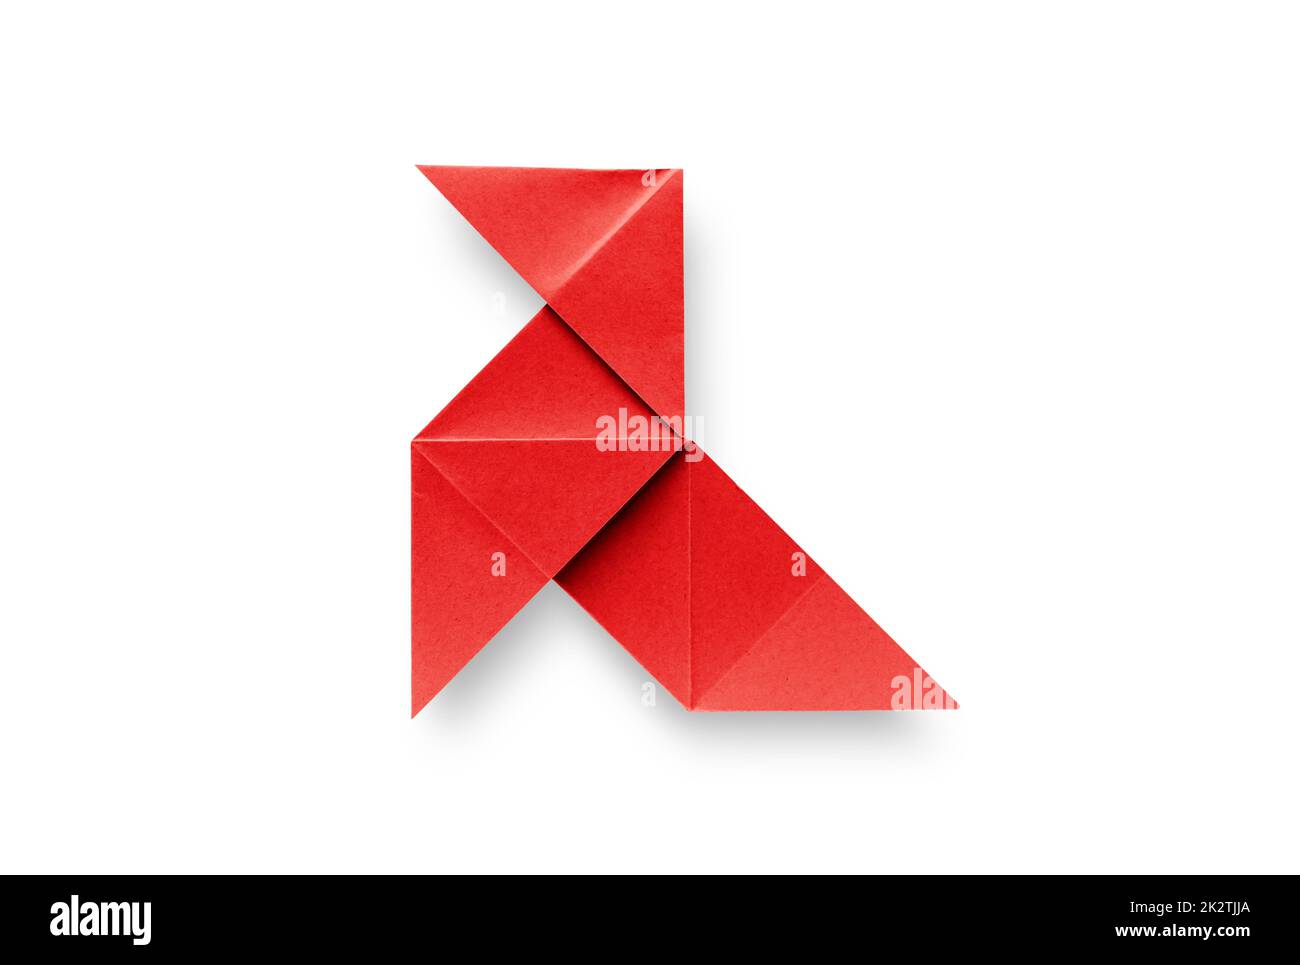 Red paper hen origami isolated on a white background Stock Photo